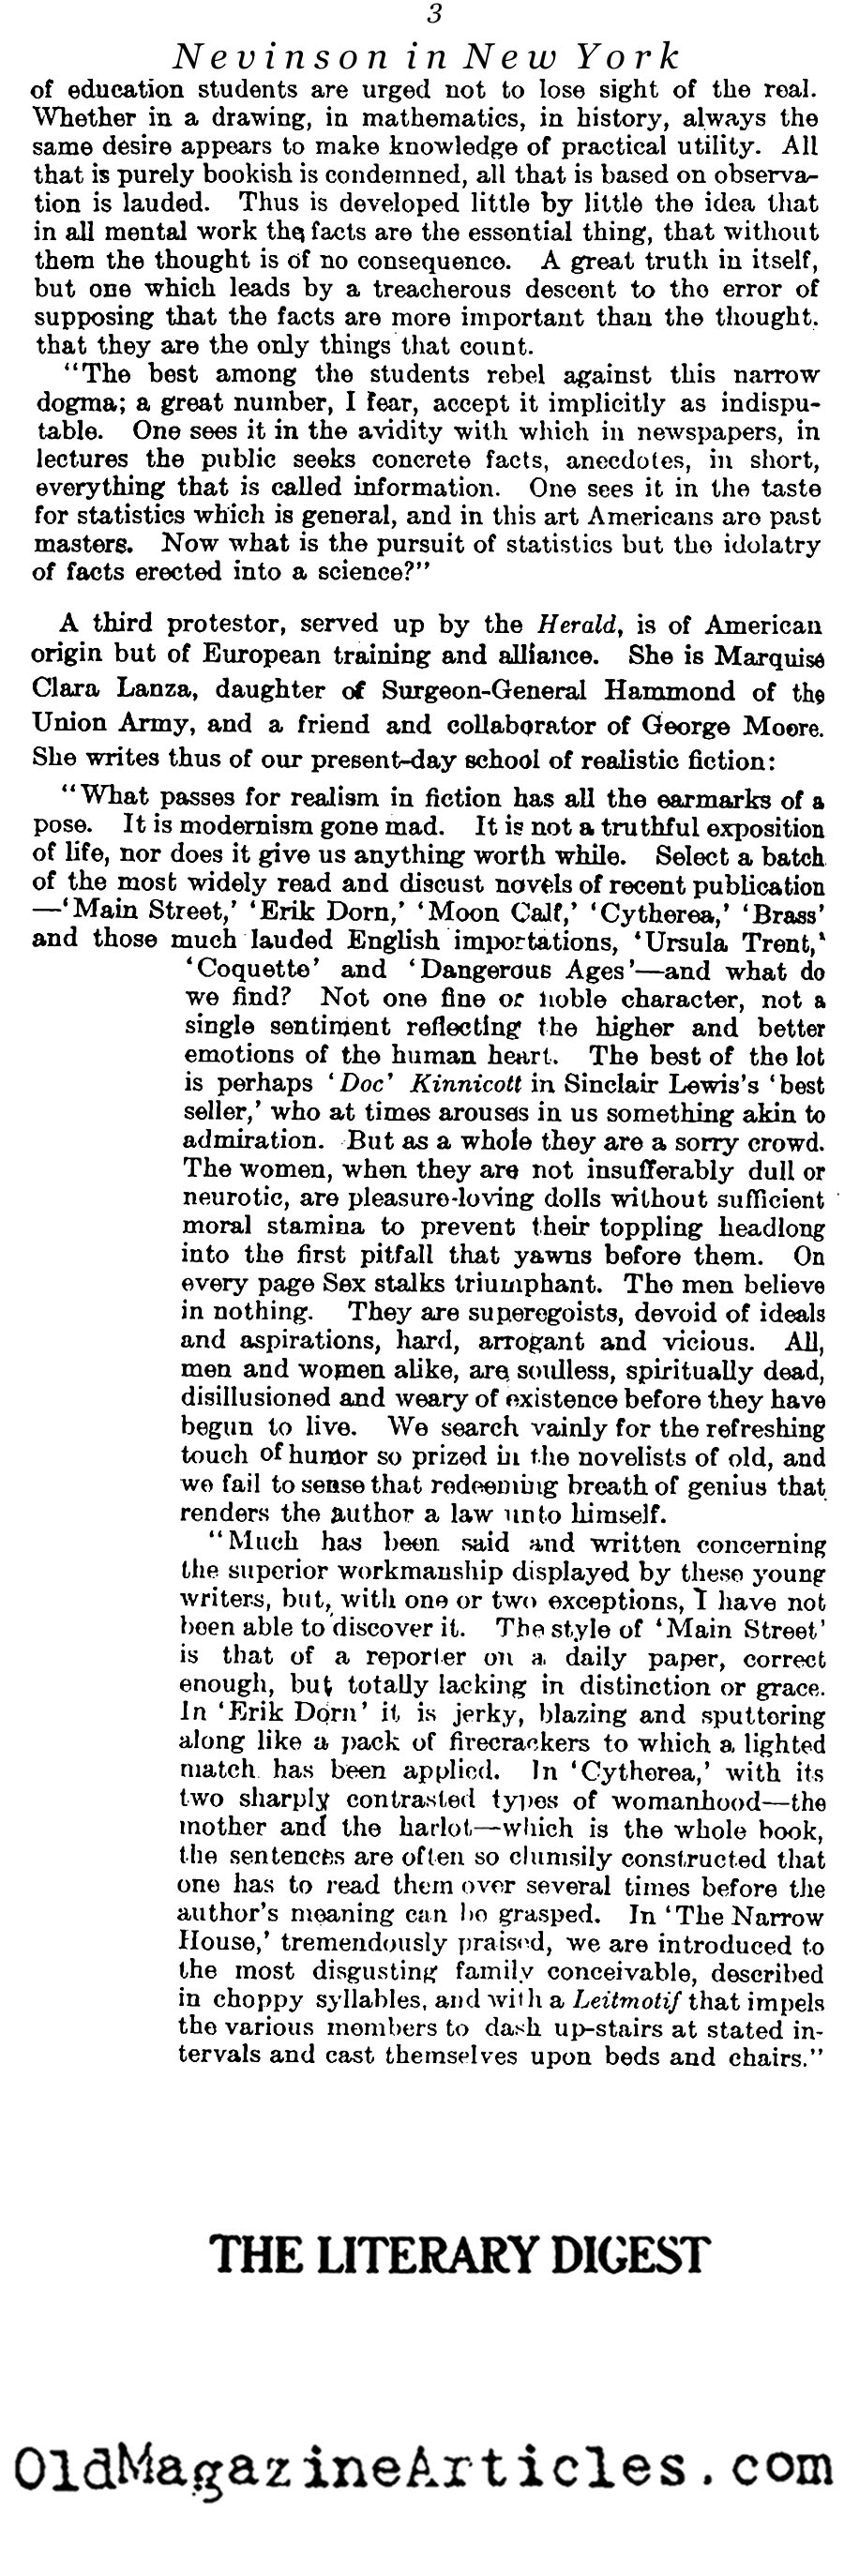 C.R.W. Nevinson Rants About  the American Art World (Literary Digest, 1922)